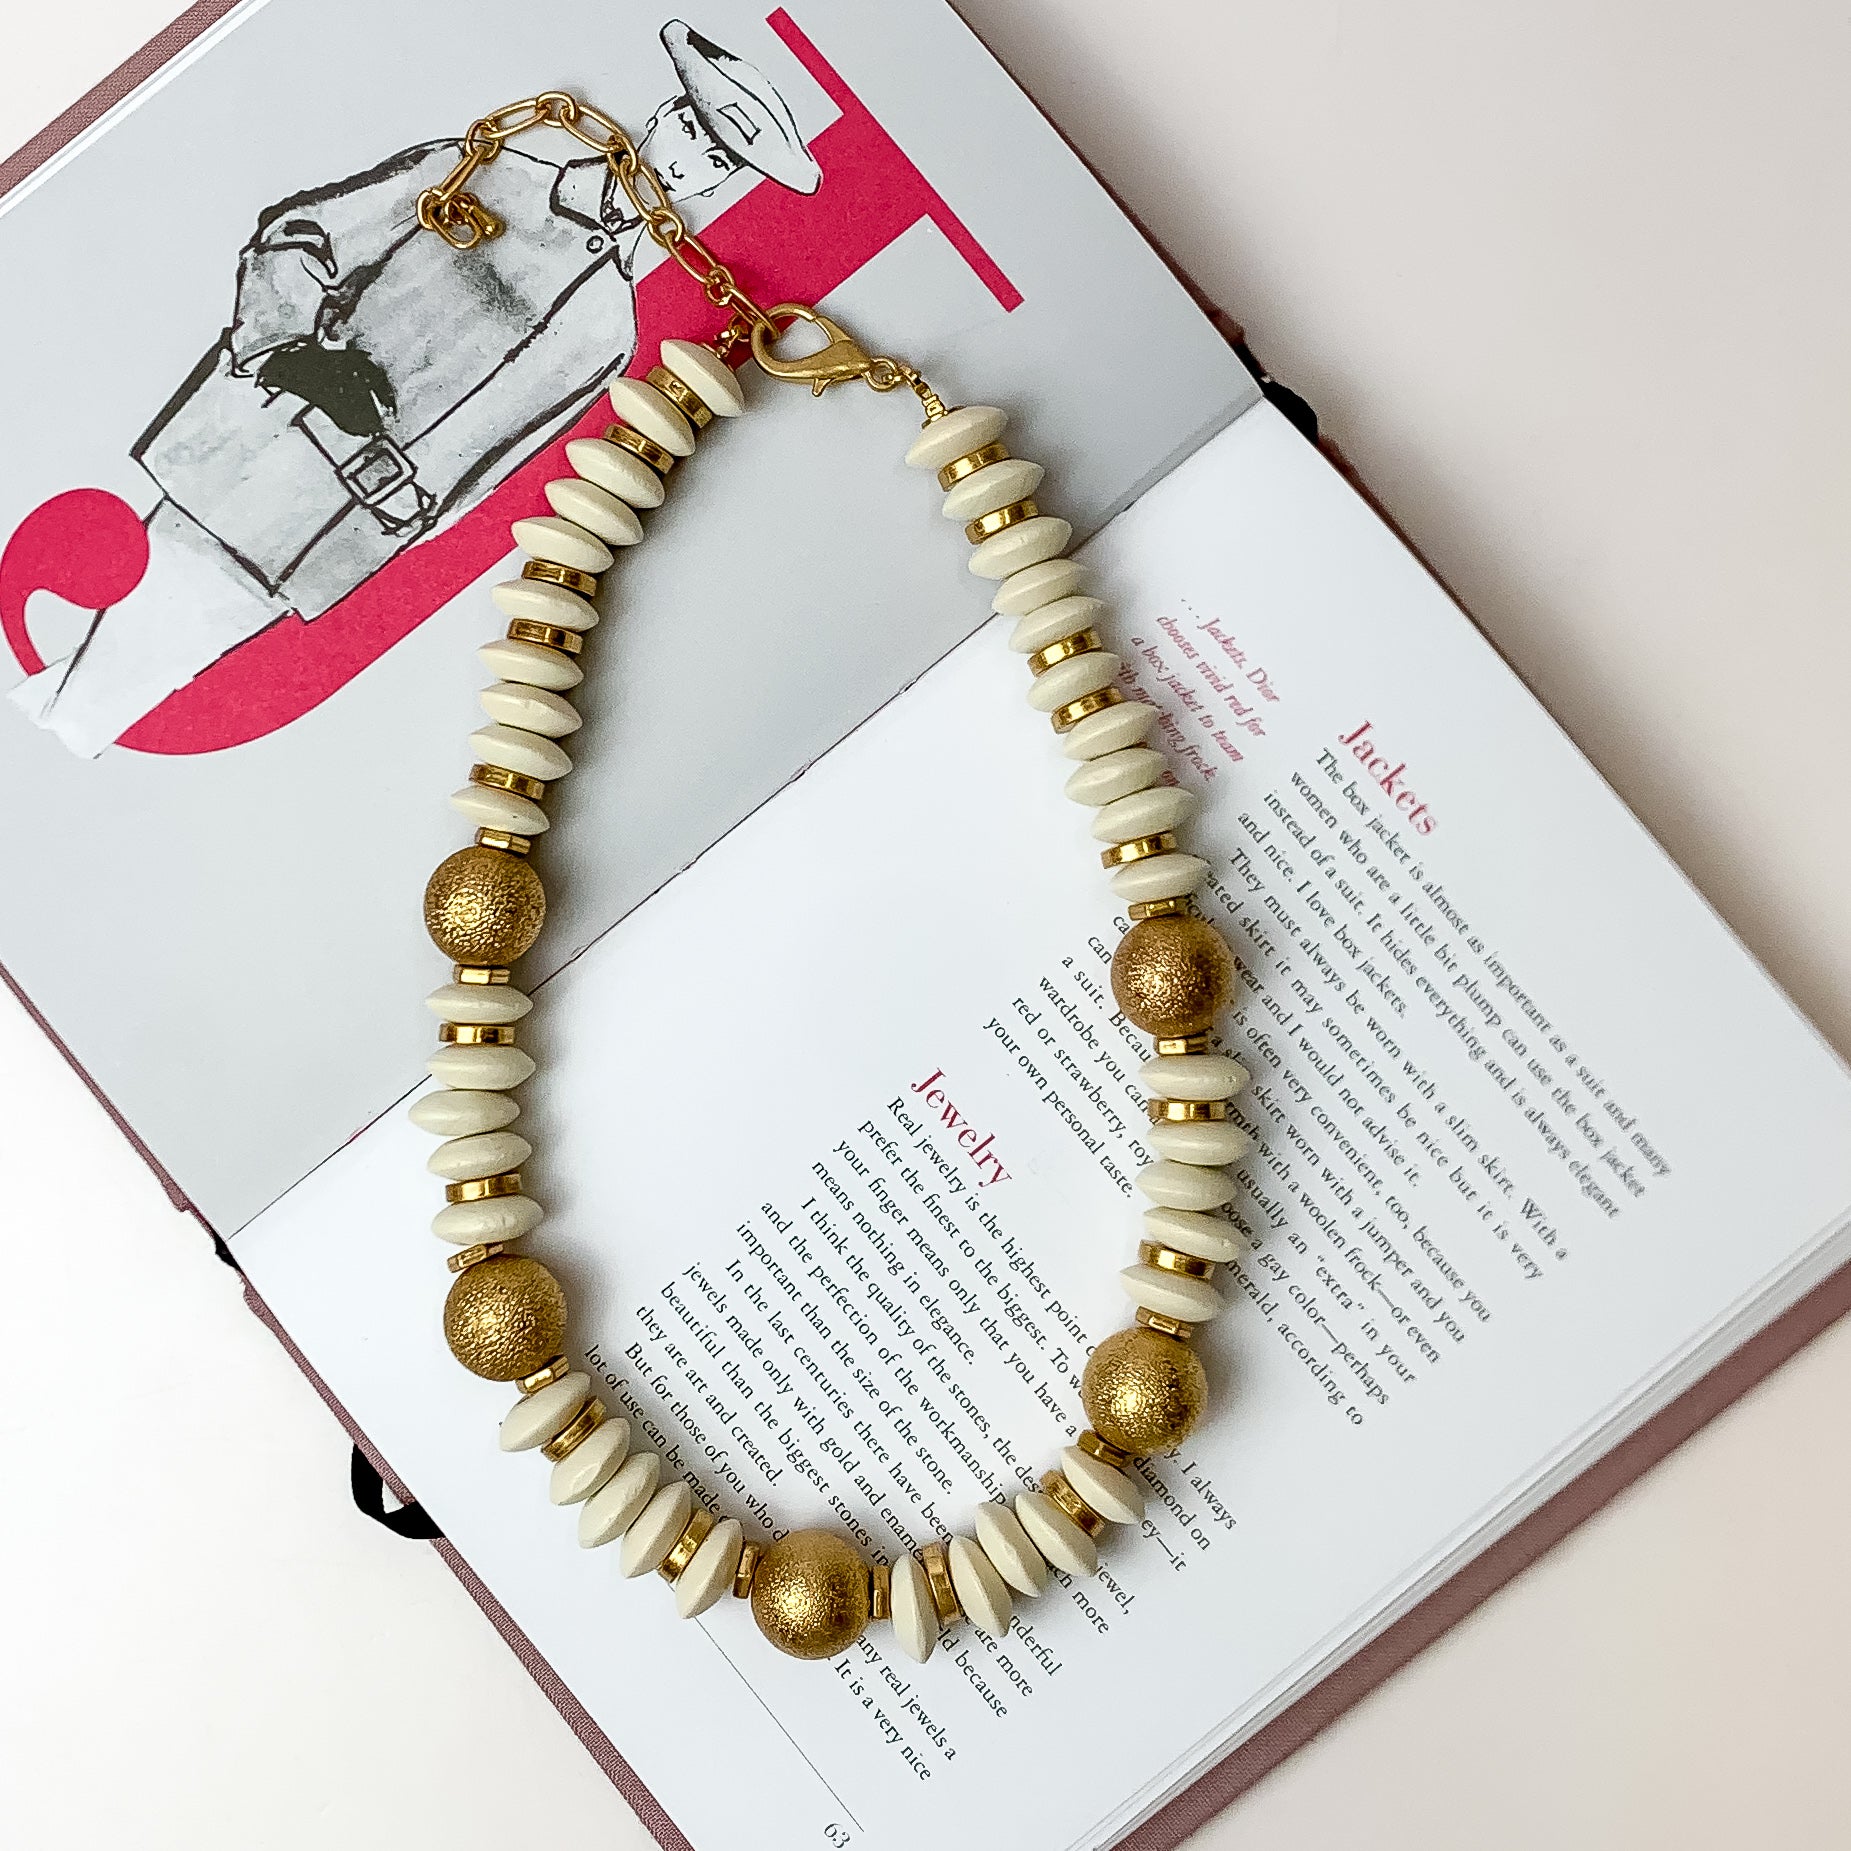 This beaded necklace with gold spacers in the color white is placed inside the pages of a book with a white background.